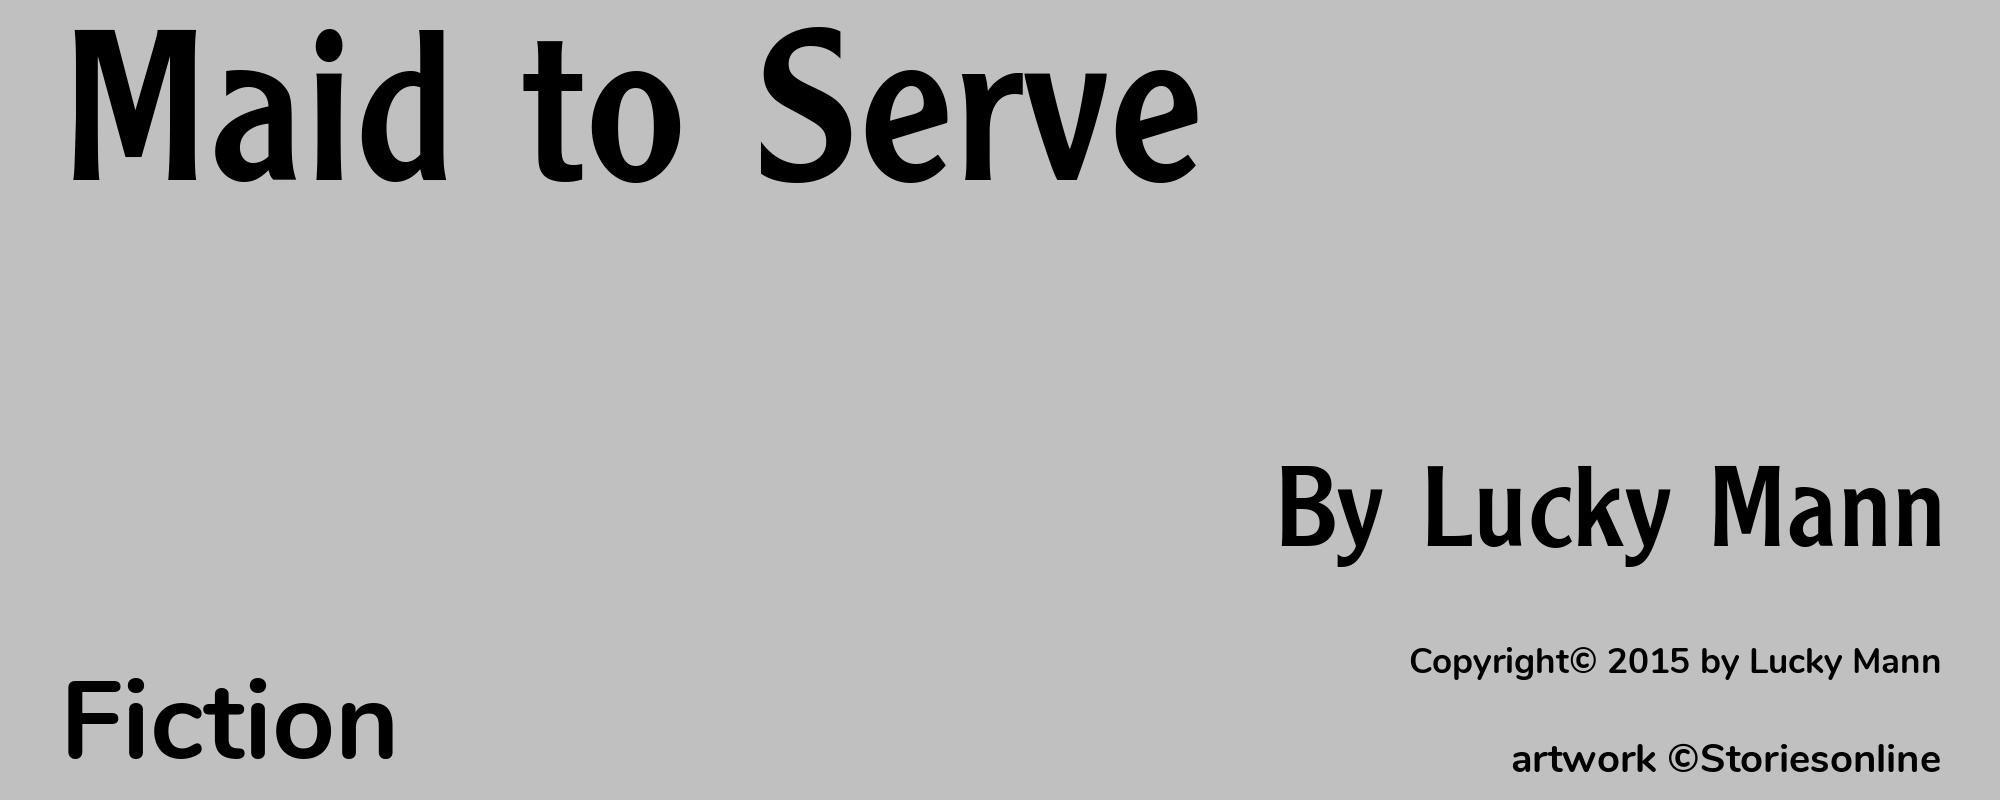 Maid to Serve - Cover